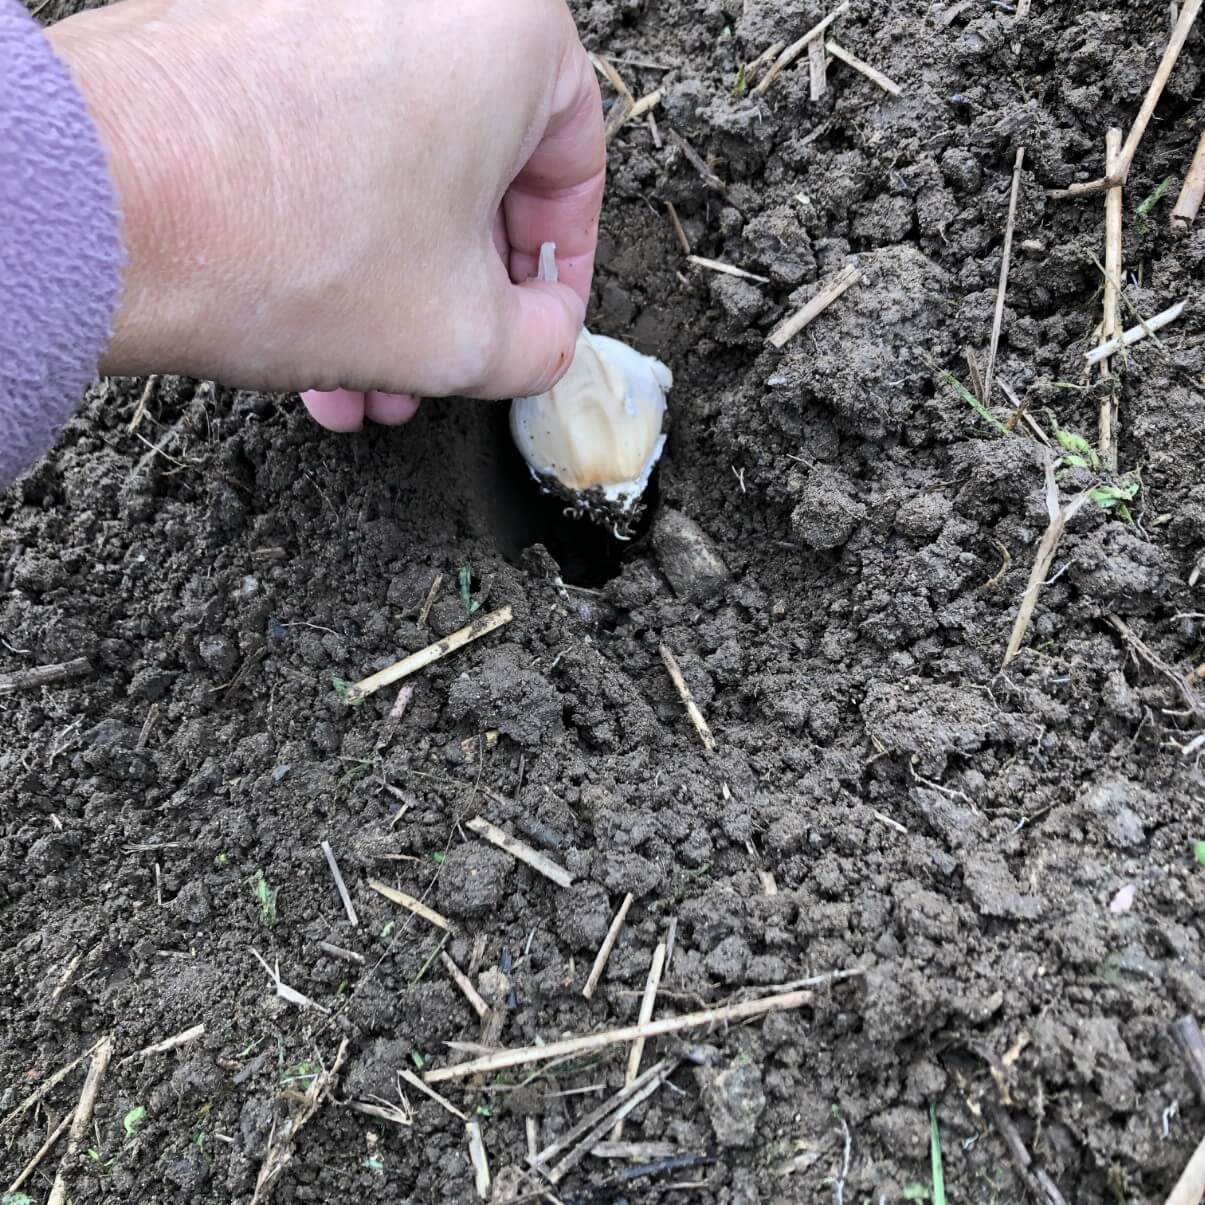 garlic clove being placed in planting hole in ground